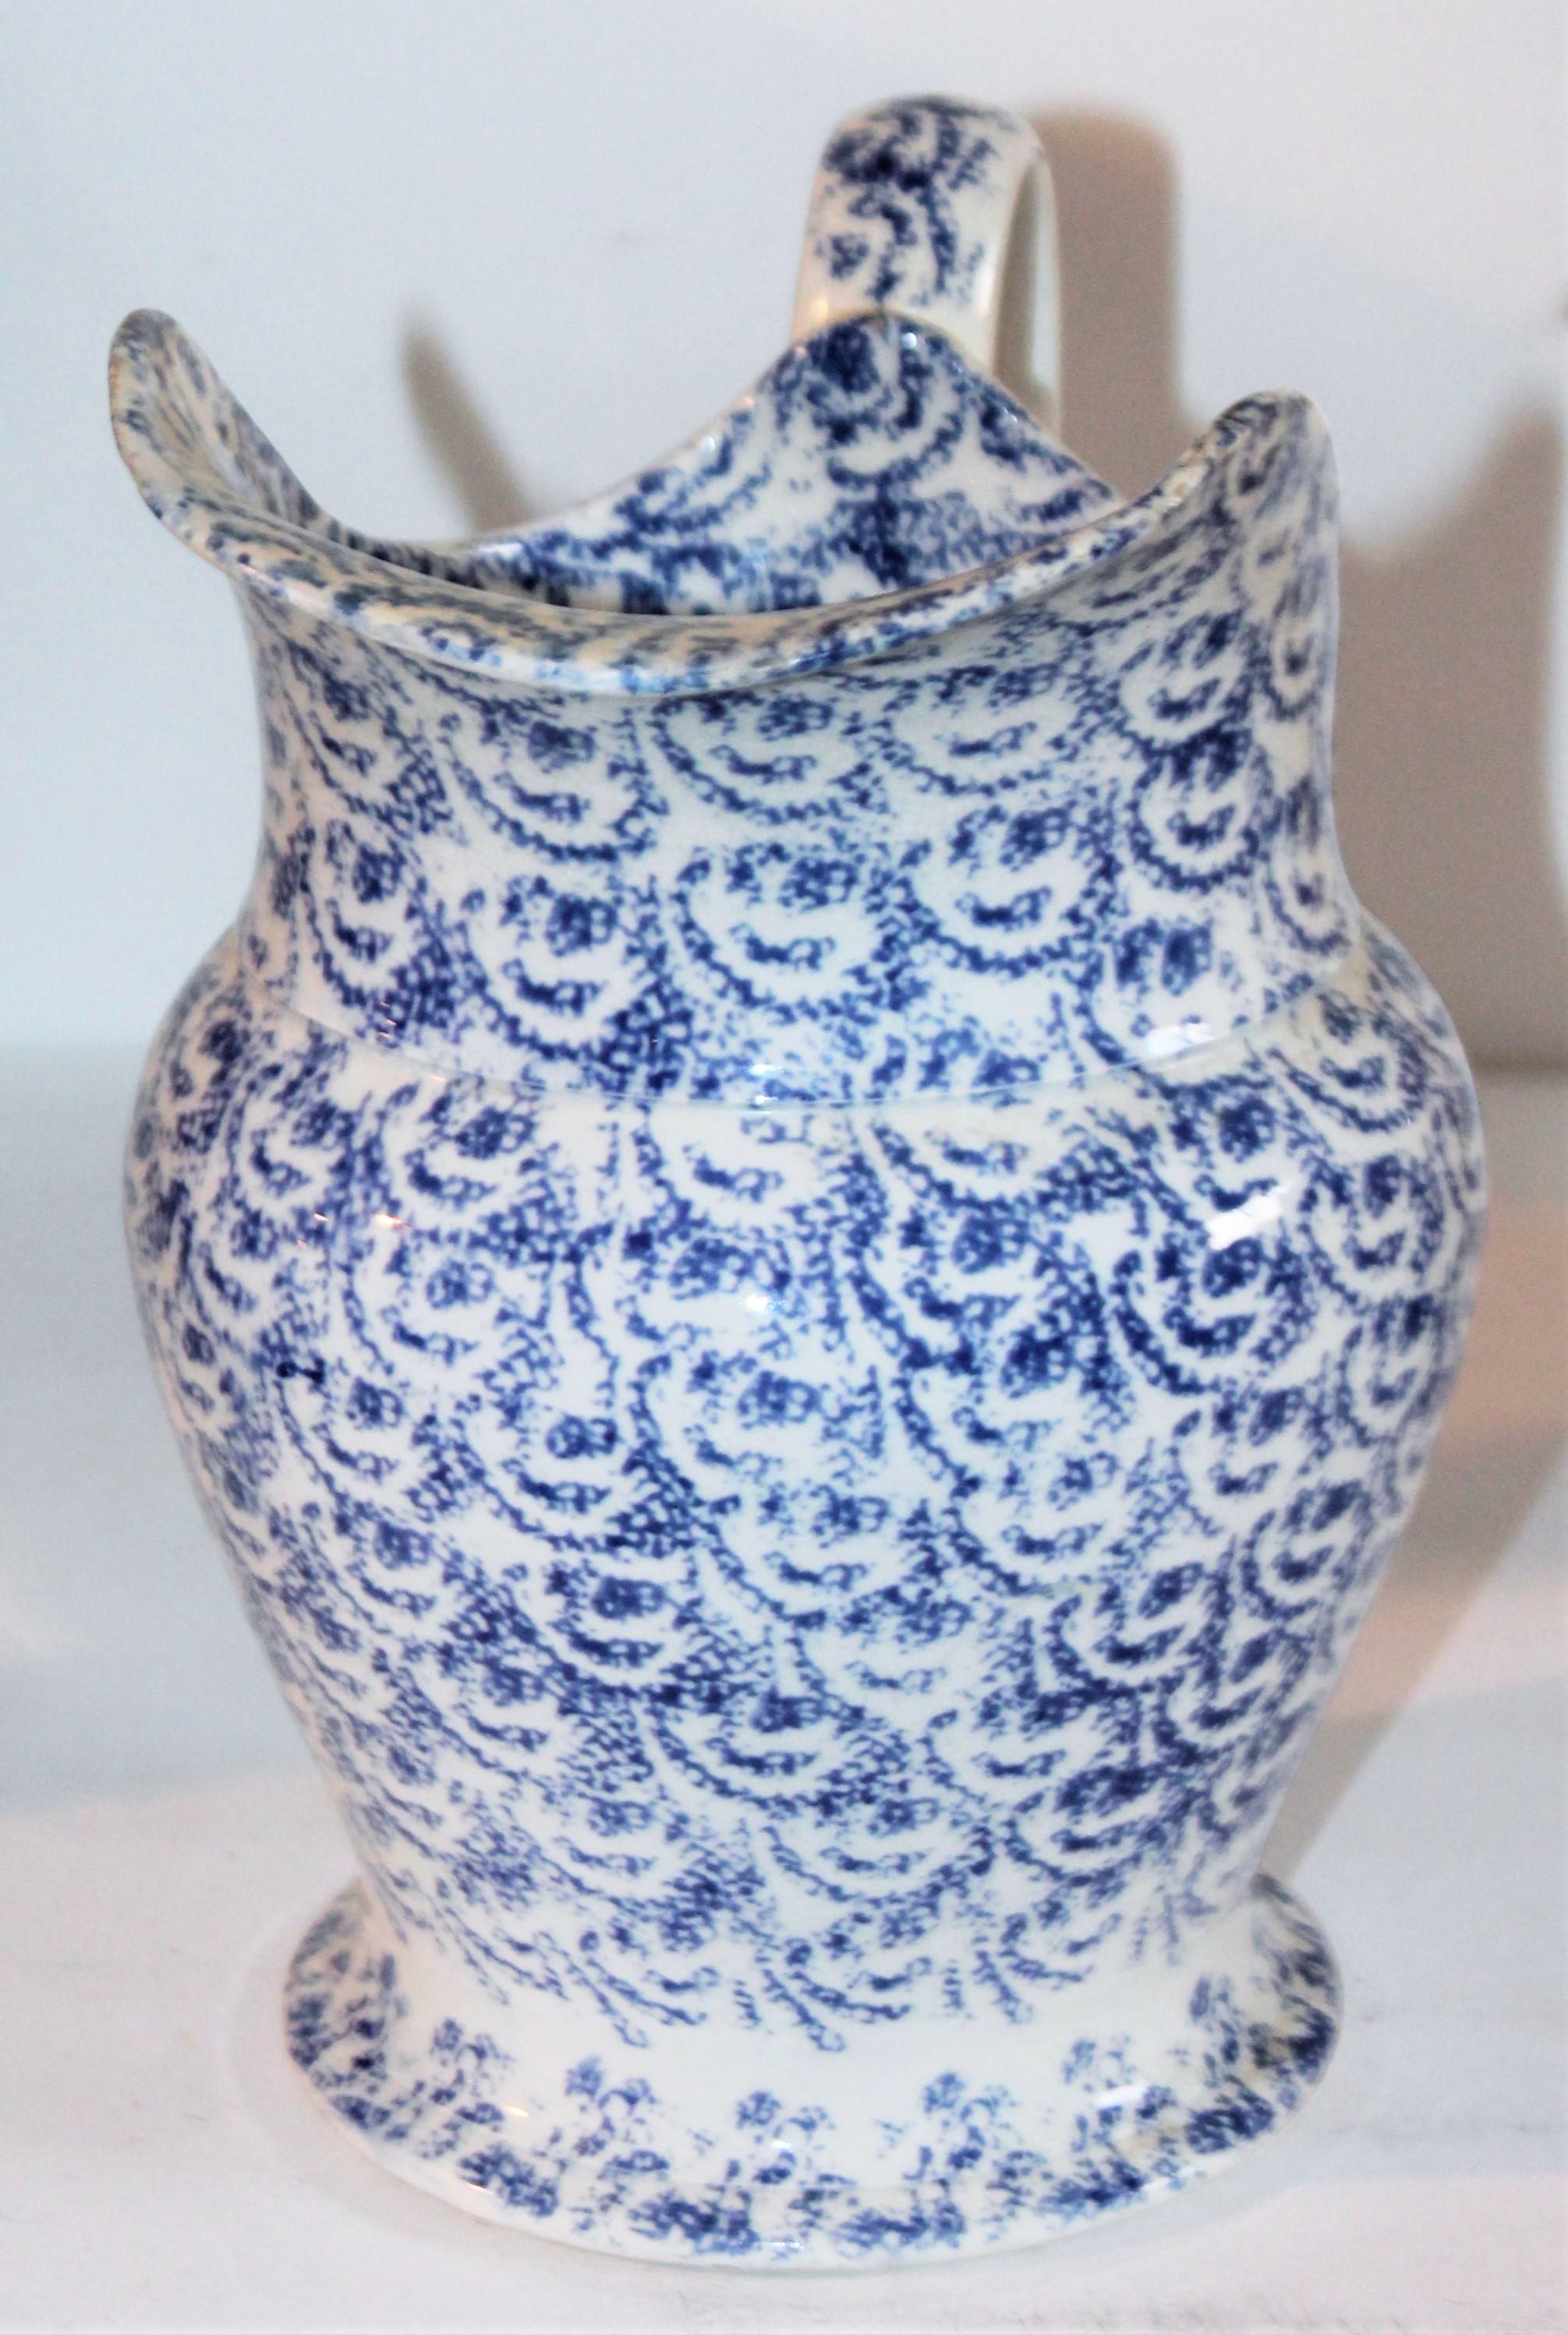 Hand-Crafted 19th Century Sponge Ware Bulbous Soft Paste Pitcher For Sale